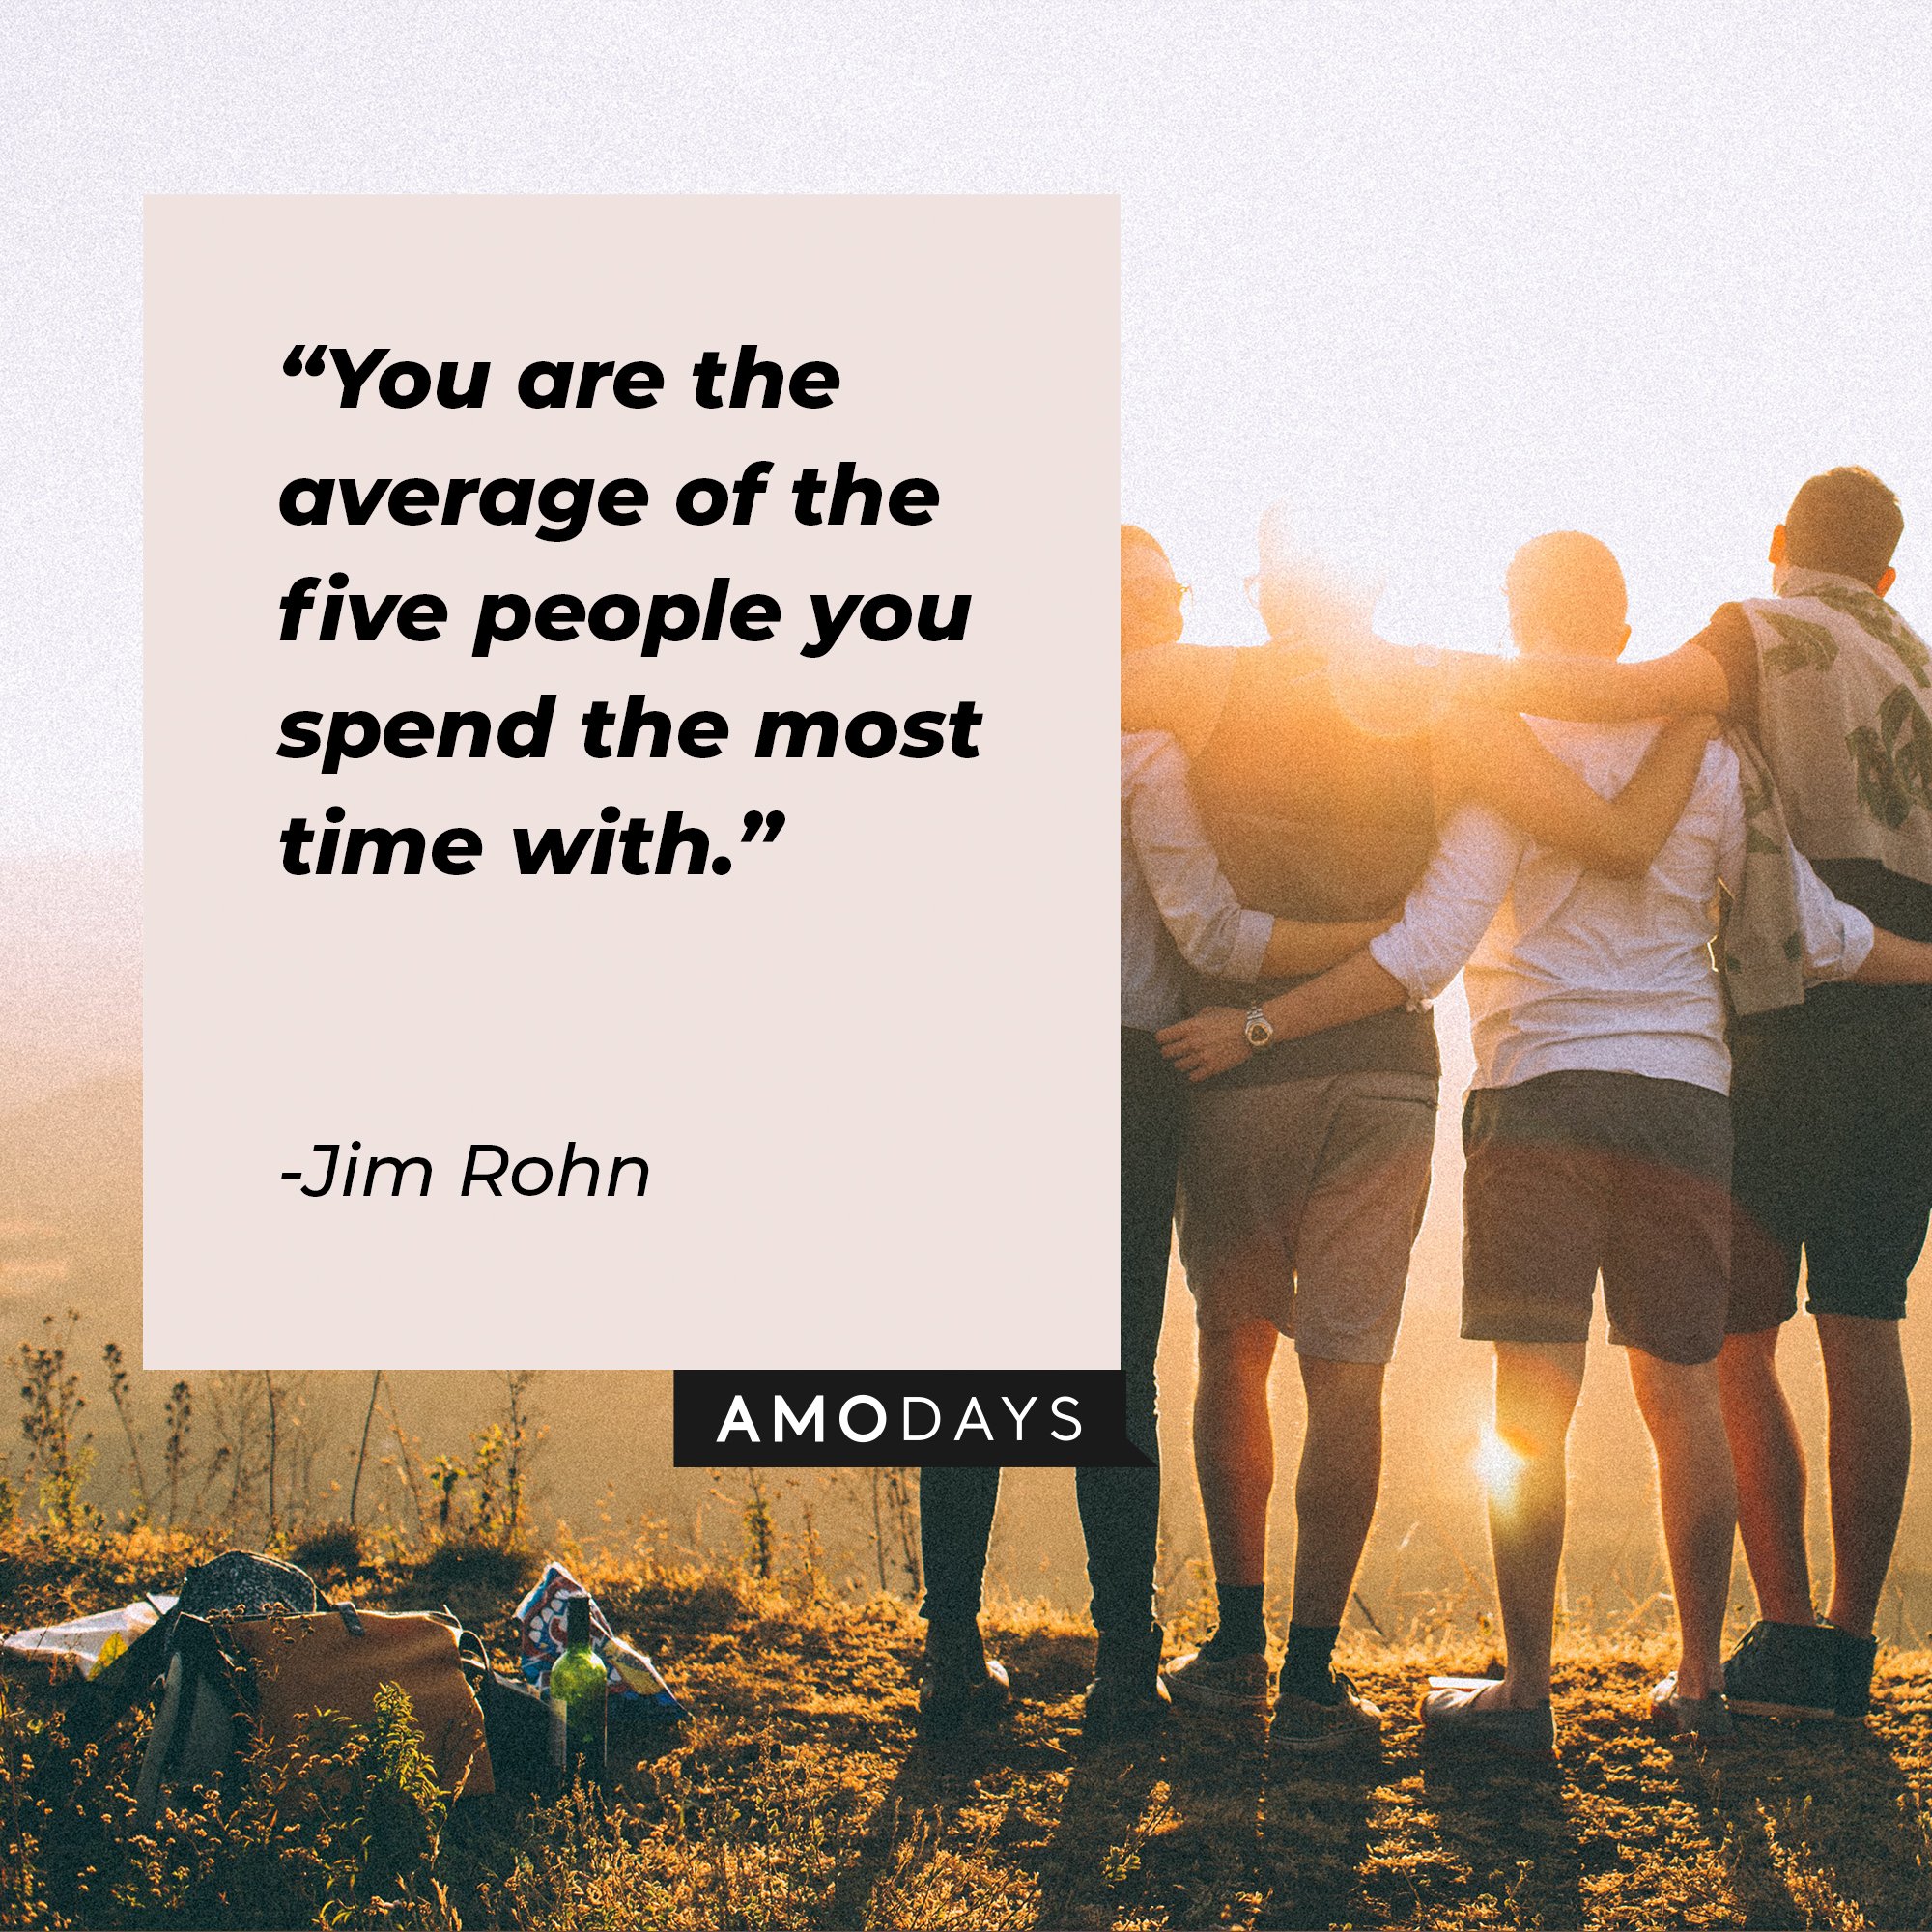 Jim Rohn’s quote: “You are the average of the five people you spend the most time with.” | Image: AmoDays